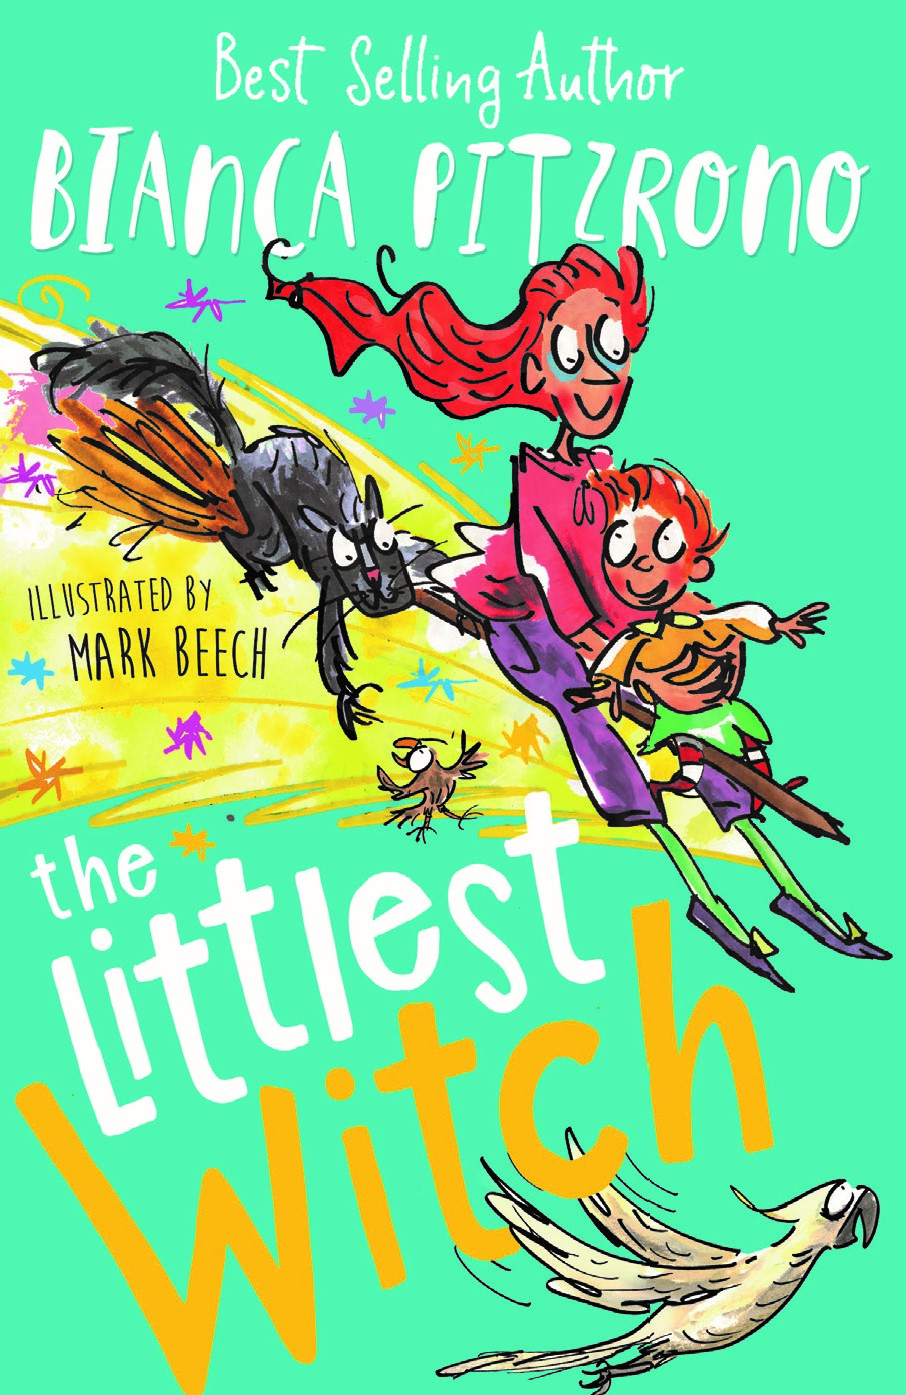 Littlest Witch cover combo colour.jpg